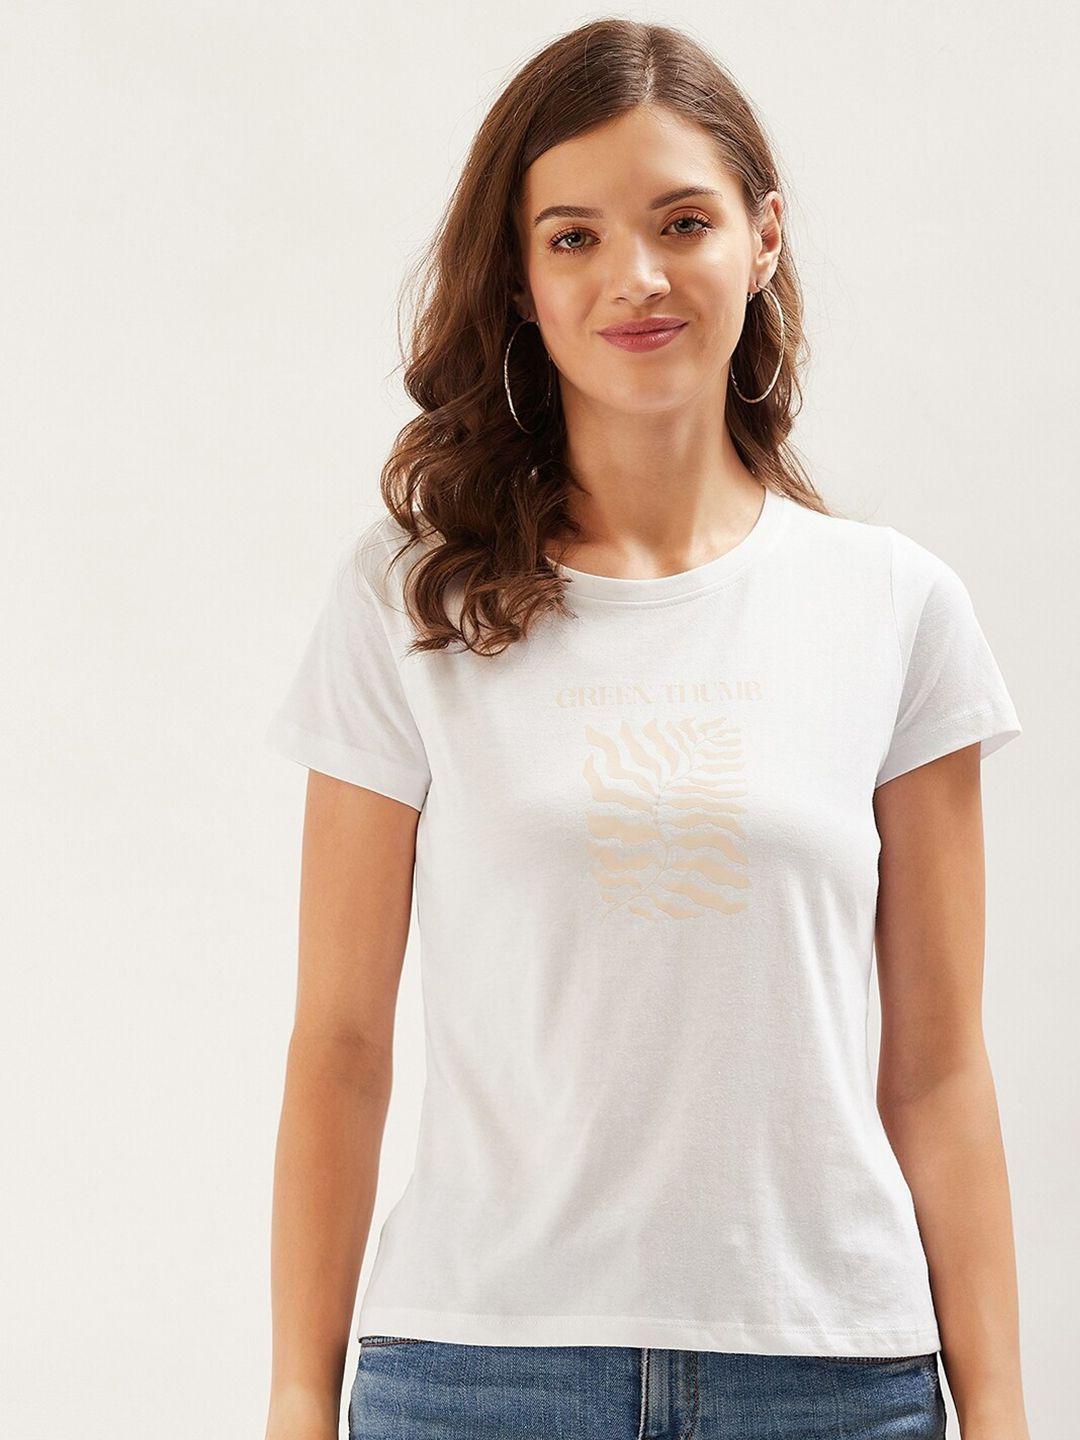 ether white graphic printed pure cotton t-shirt